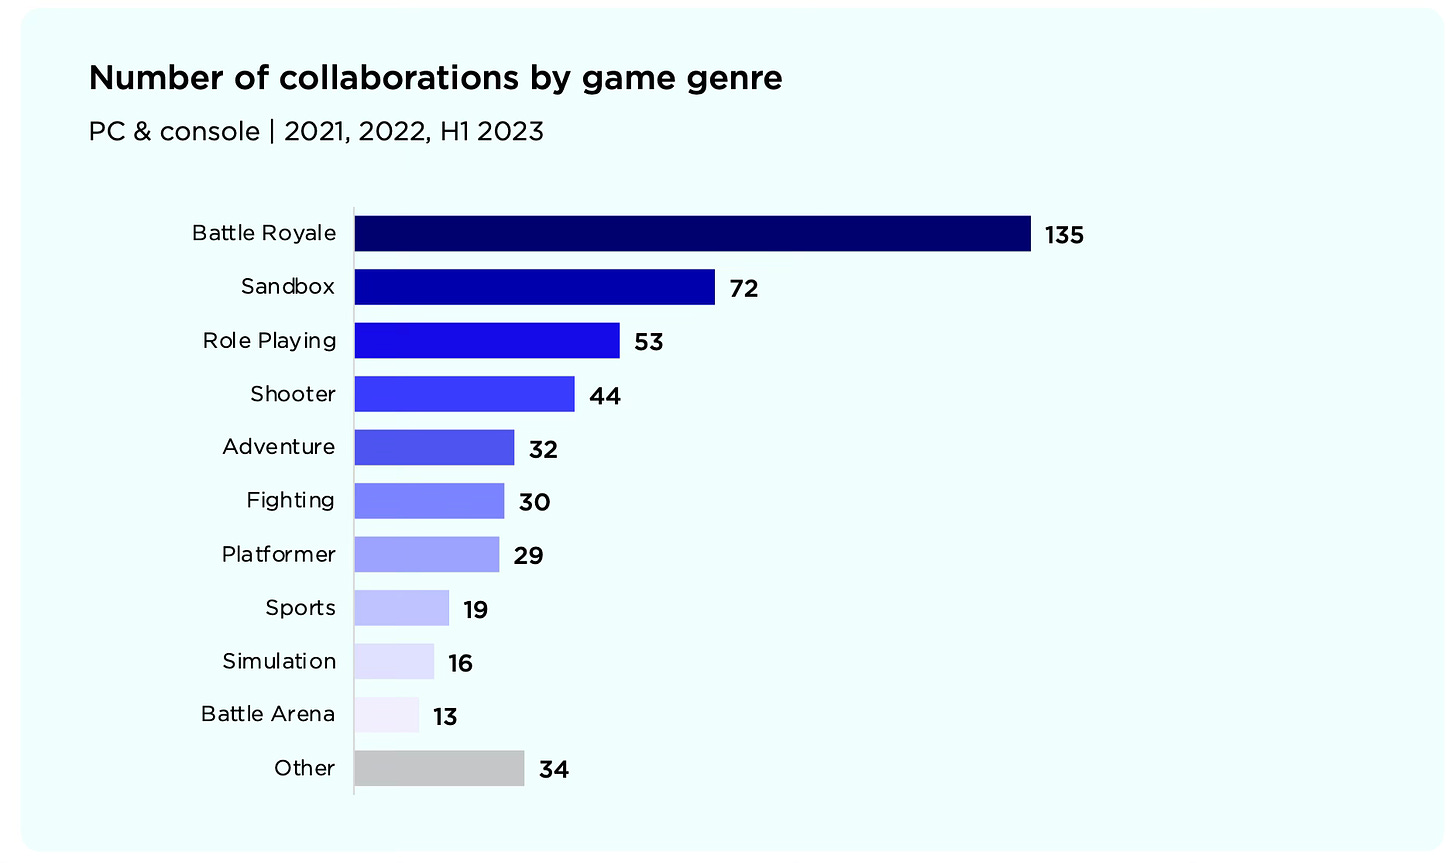 Number of game collaborations genre